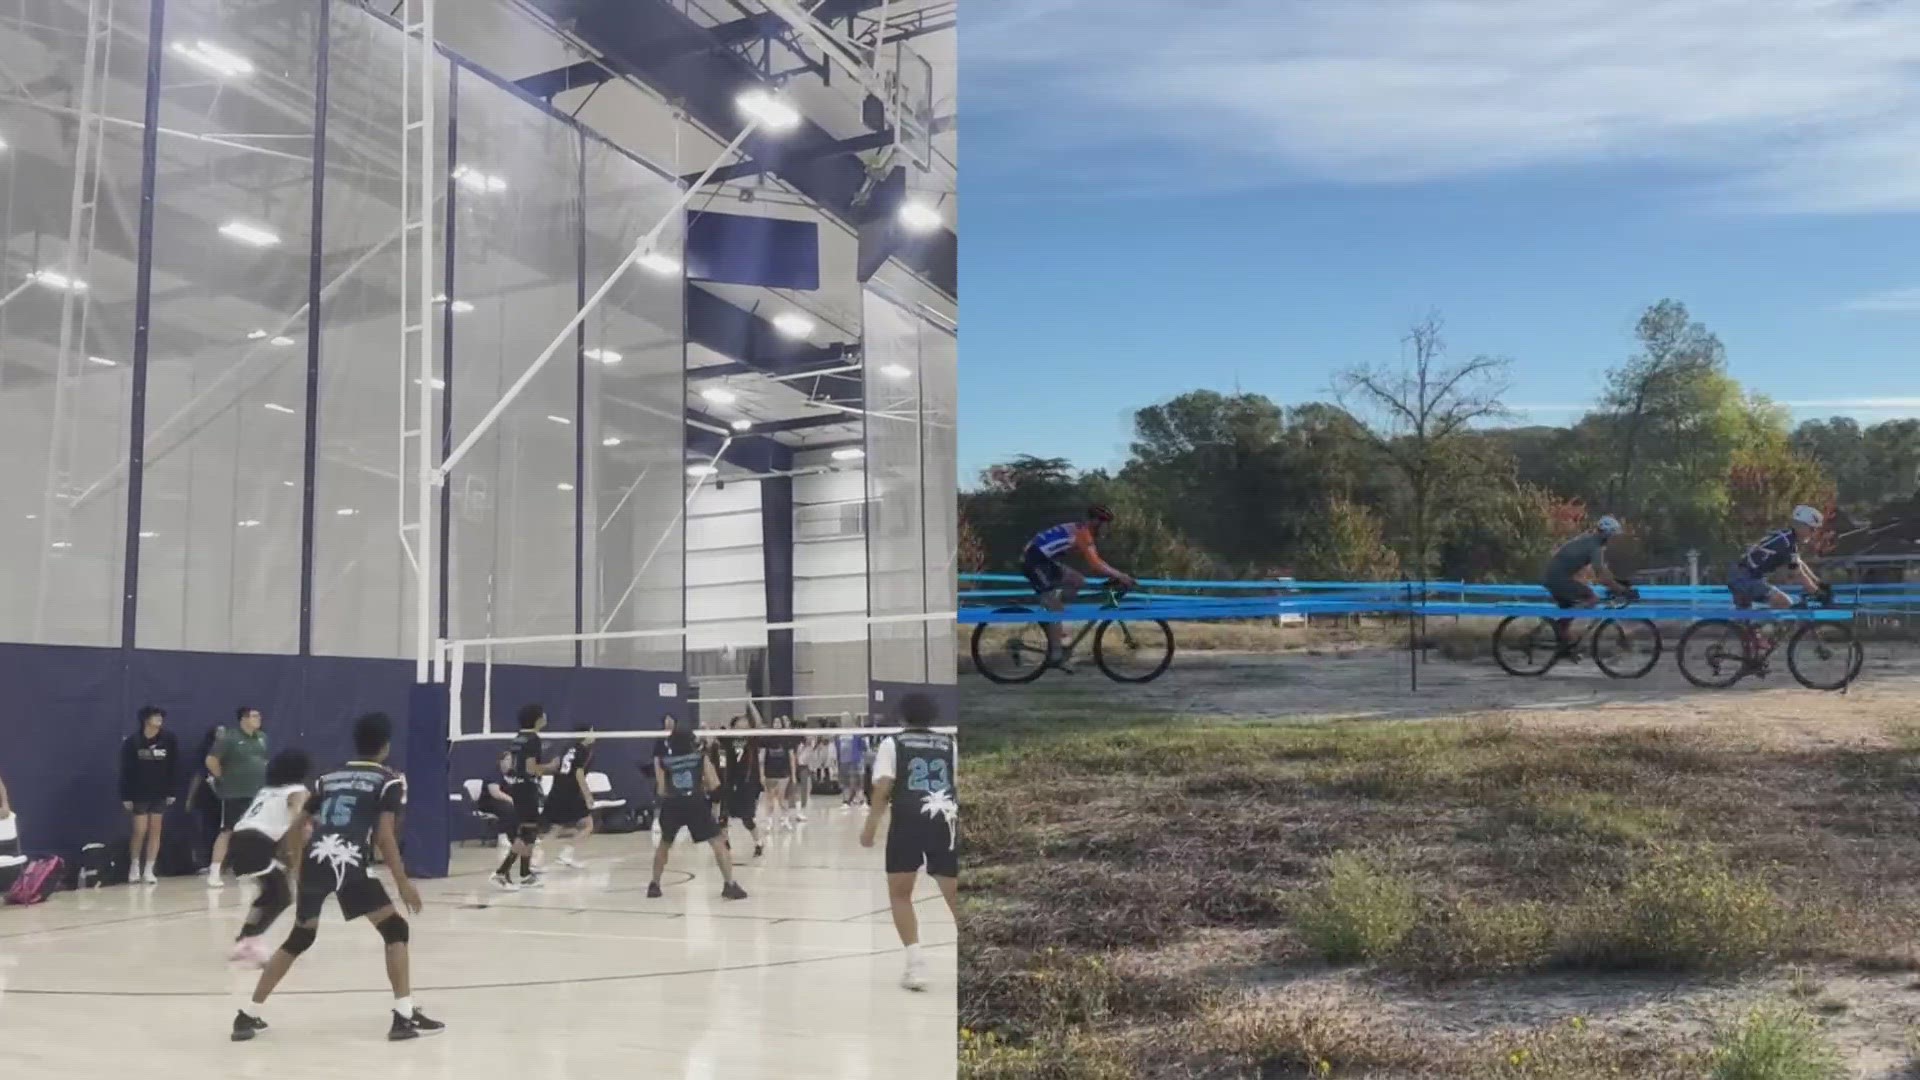 Cyclocross and the Far Western Junior National Boy's Volleyball Tournament are being held in Placer County this weekend, likely to boost the local economy.